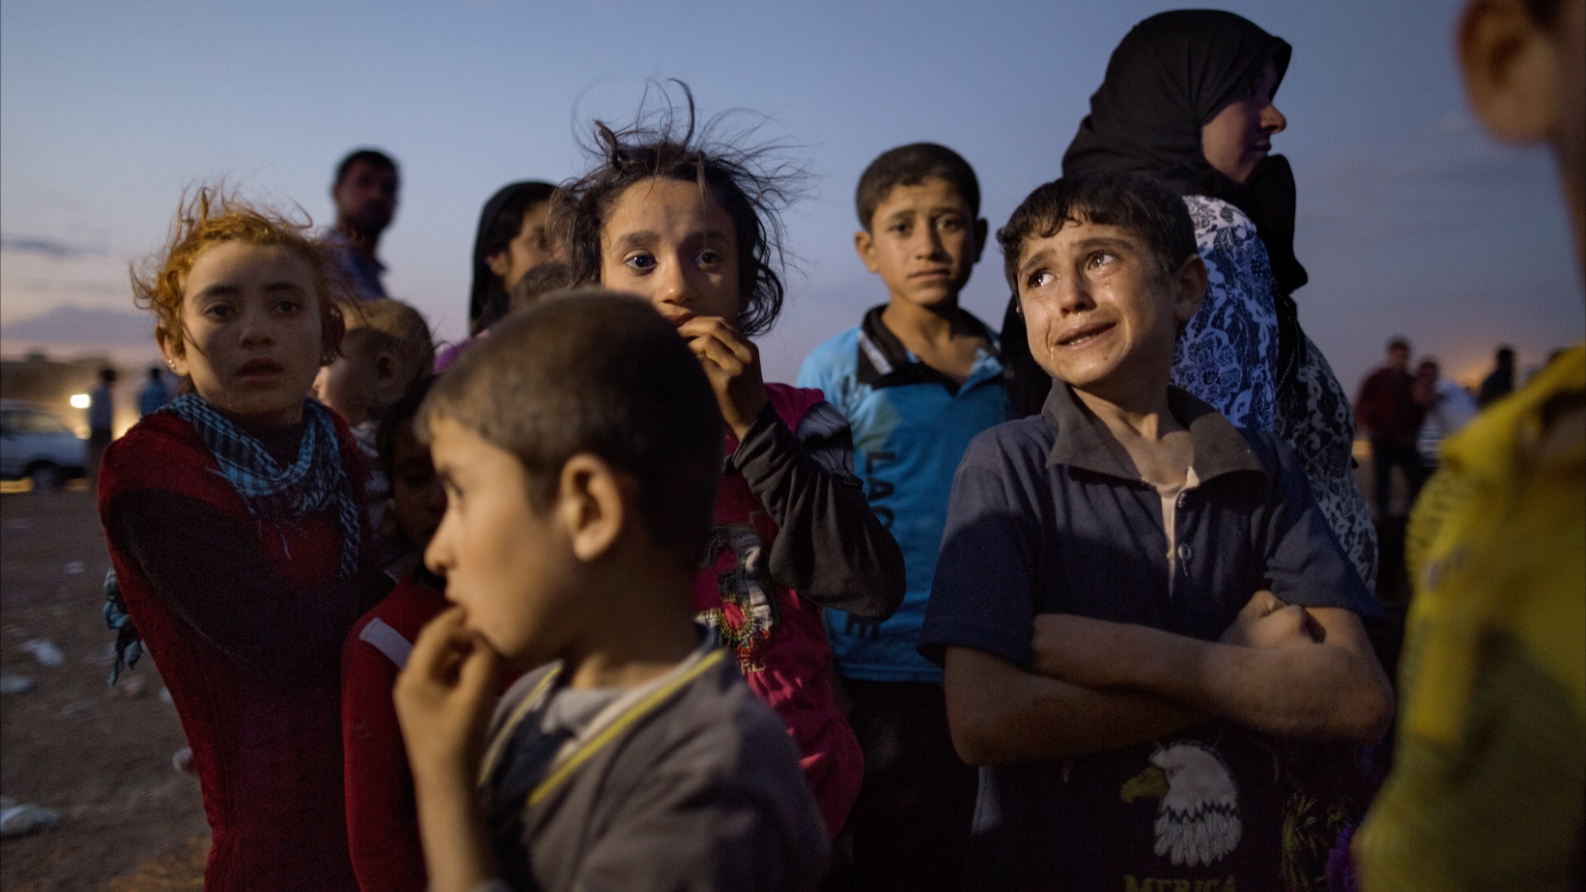 Fleeing ISIS Conflict: Photographing Refugees